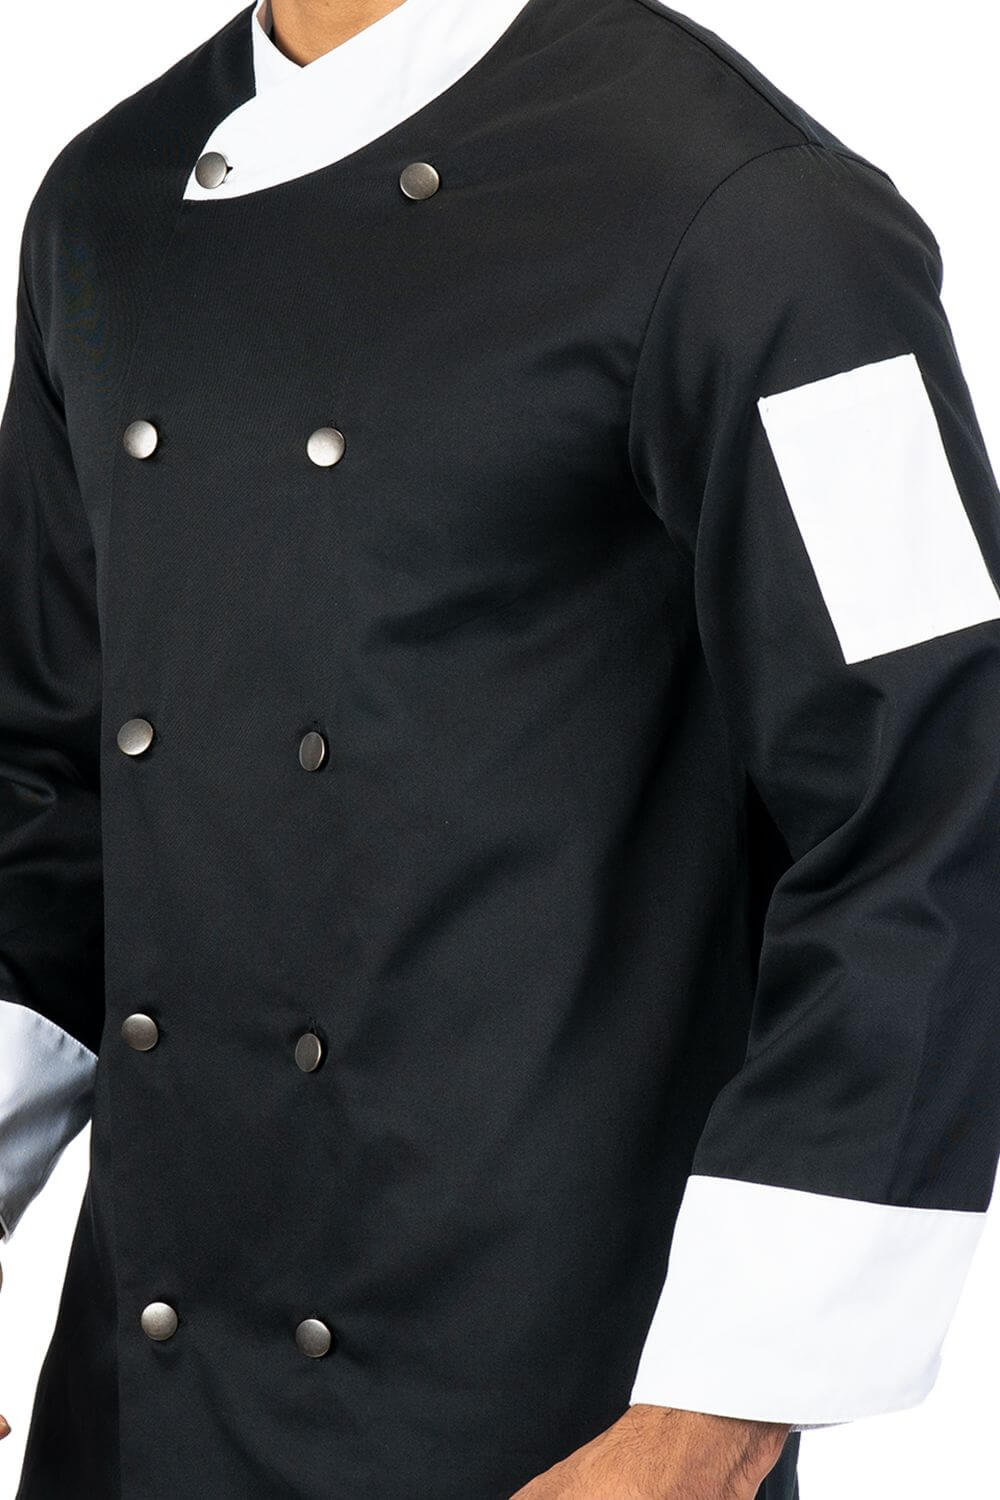 Mandarin Collar and Cuffs With contrast fabrics Cotton Blend Black Chef Jacket